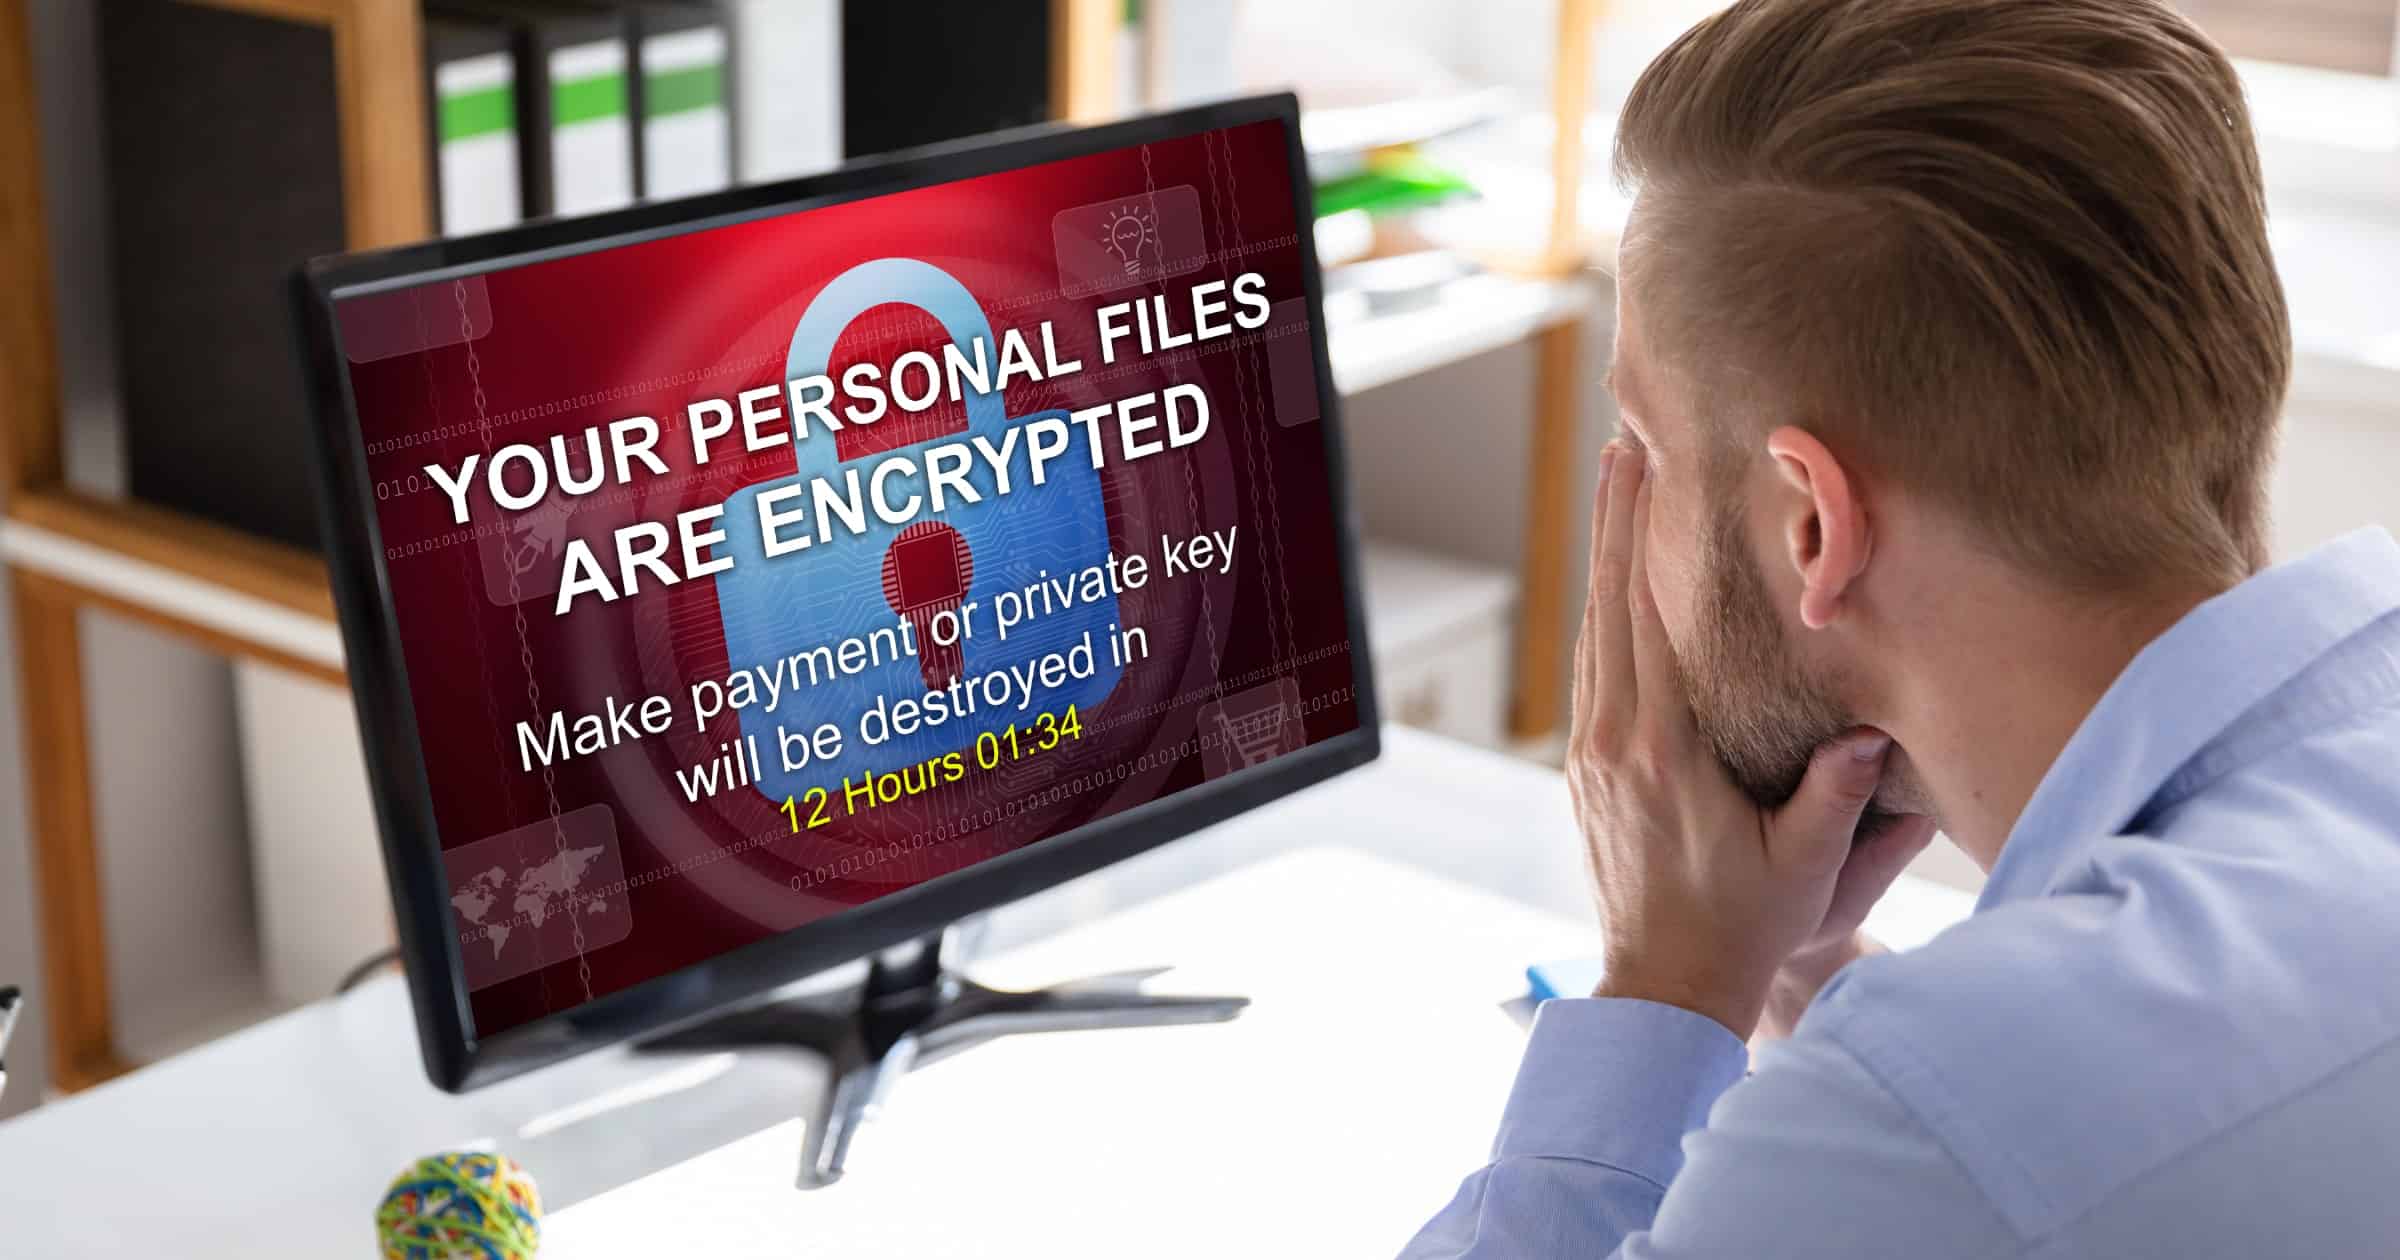 Here’s What We Know About PYSA Ransomware